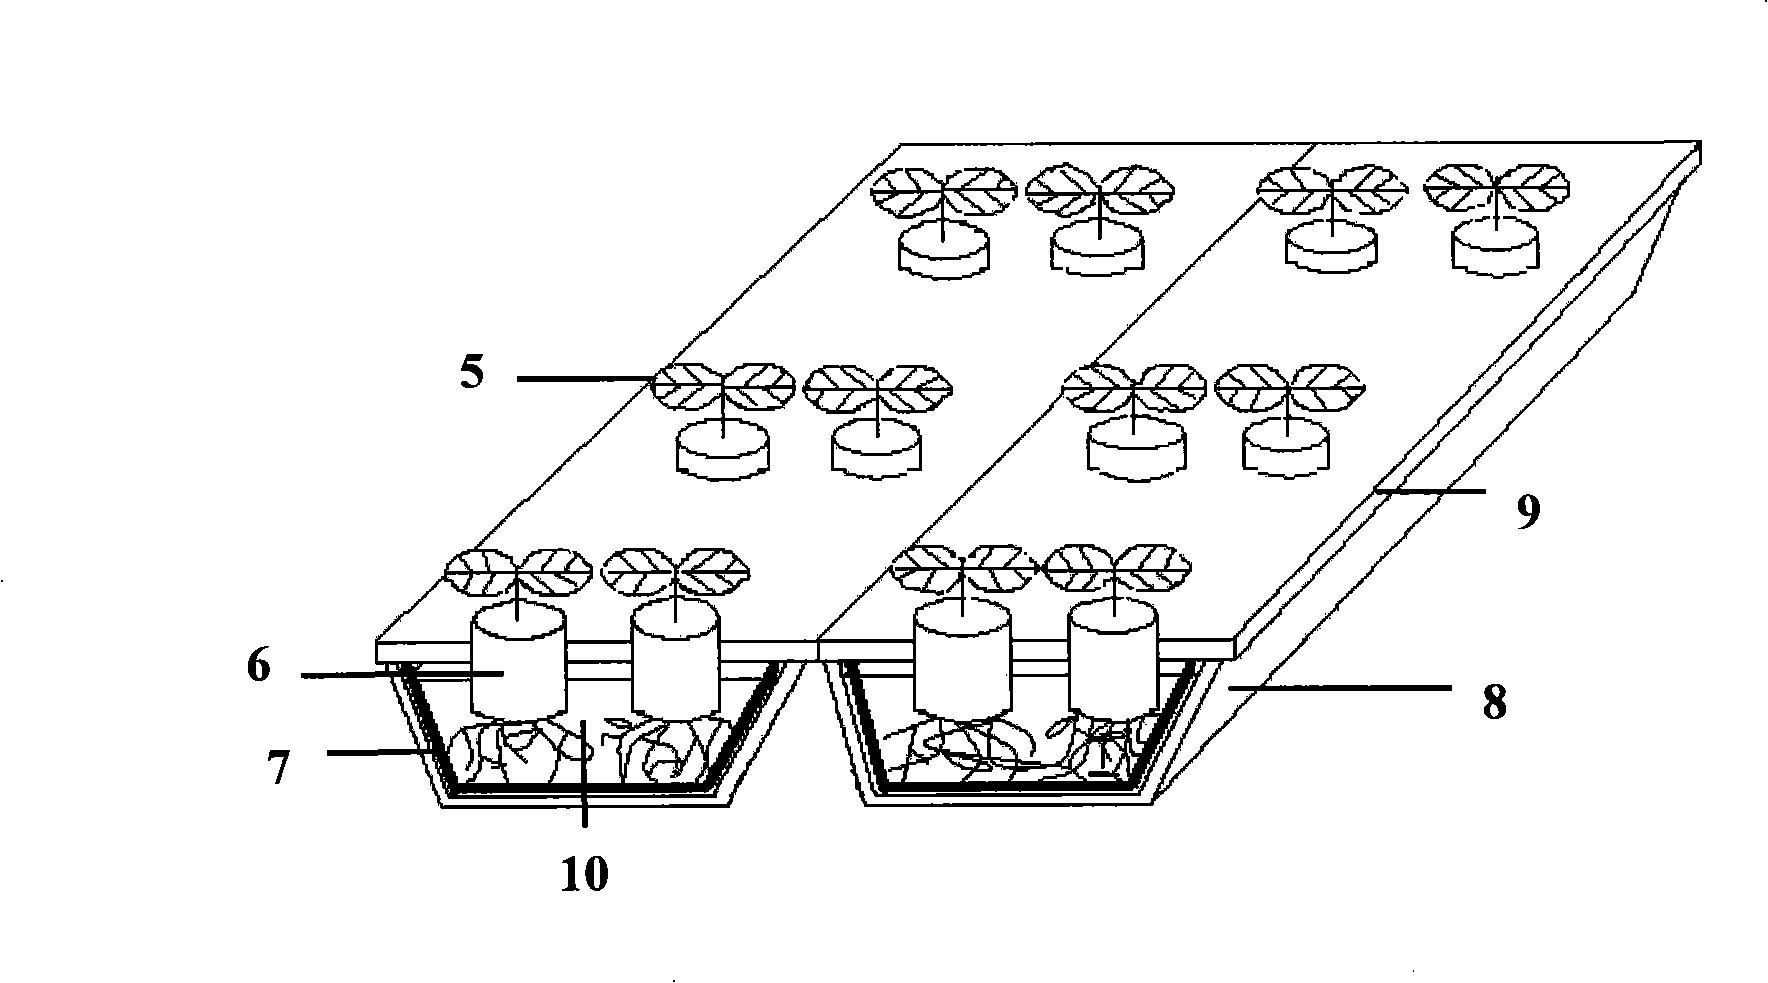 Soilless capillary hydroponics rearing groove